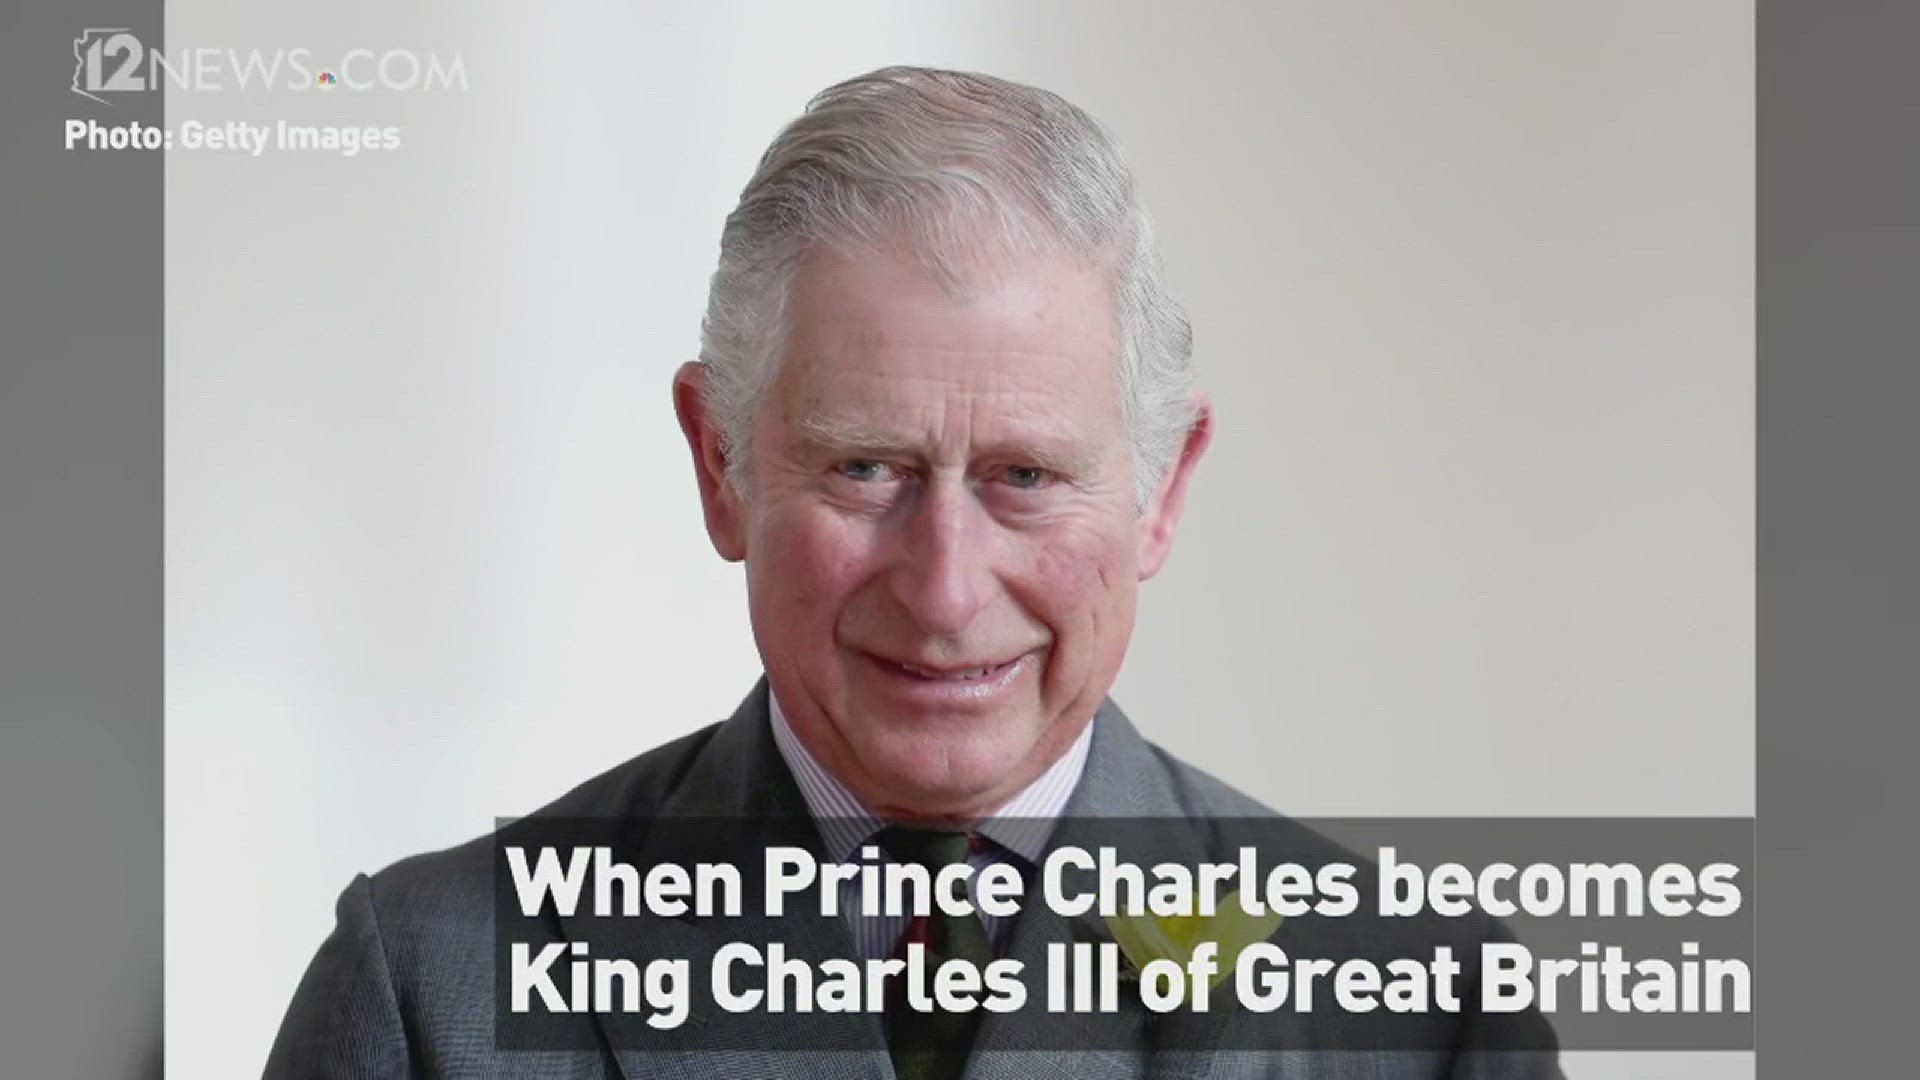 As a new biography suggests, when Prince Charles becomes King Charles III of Great Britain, he may be the most improbable, even peculiar, monarch to ascend the throne in nearly 1,000 years.